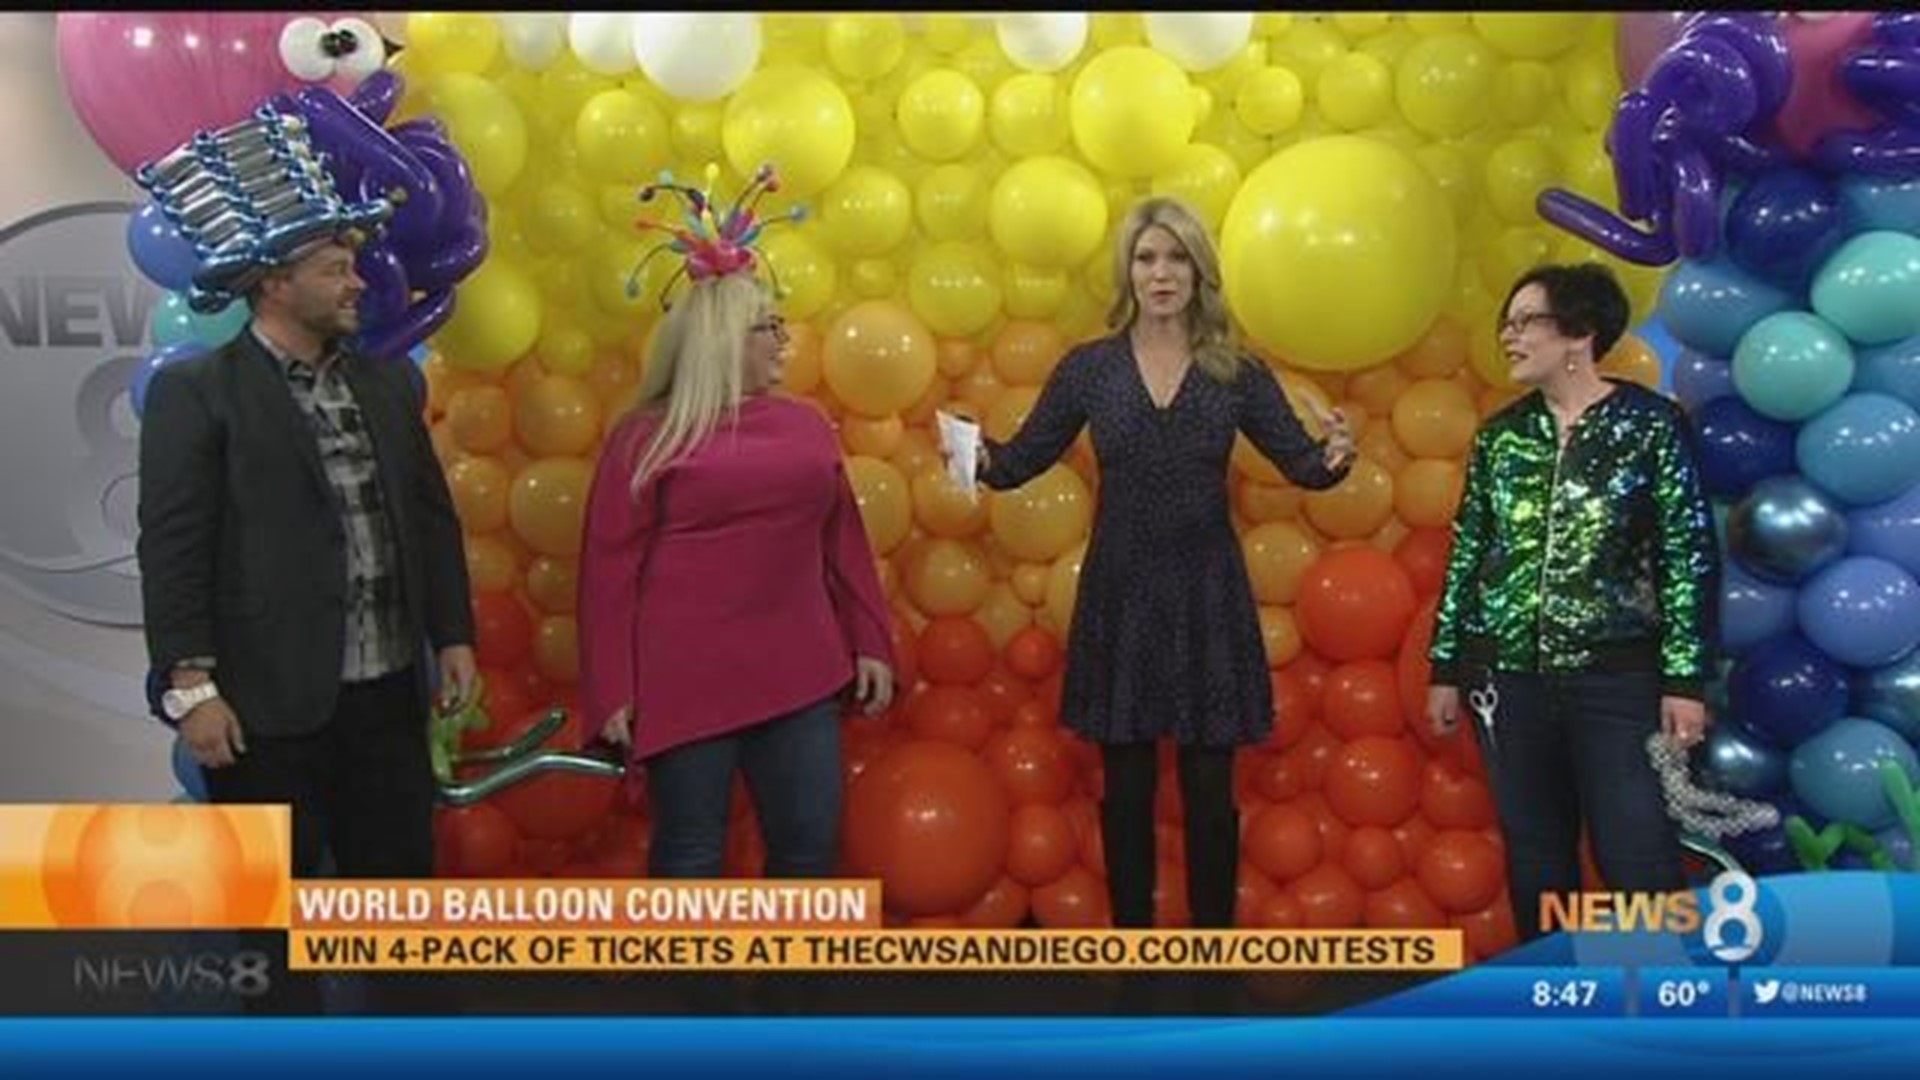 San Diego is the center of the balloon world with the World Balloon